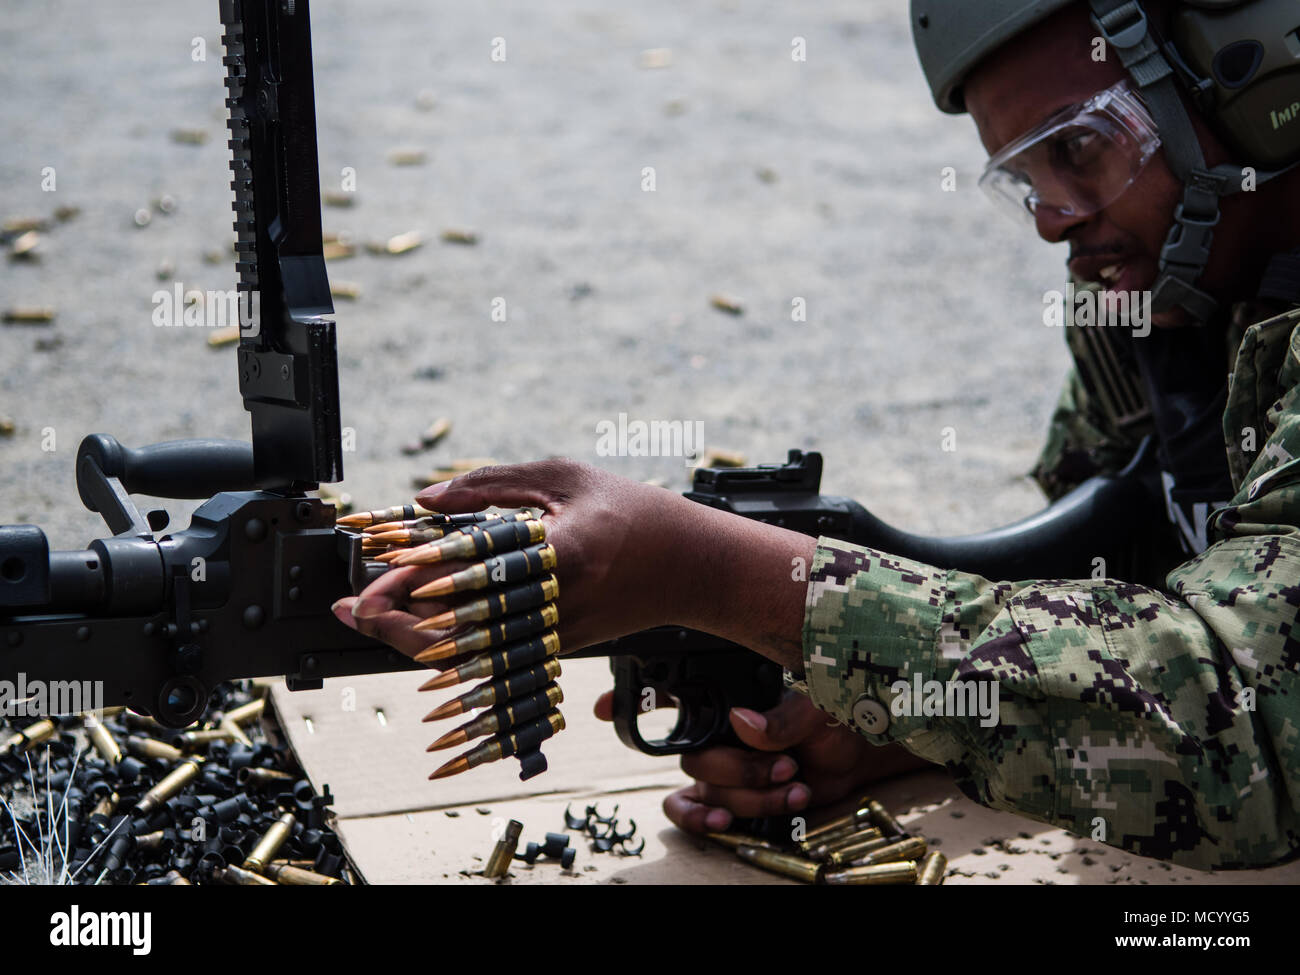 180308-N-LI768-2267  SAN DIEGO (March 8, 2018) Aviation Ordnanceman 2nd Class Brandon Starkey, assigned to the amphibious assault ship USS Makin Island (LHD 8), loads ammunition into an M240B machine gun during a crew-served weapons qualification at South Bay Rod and Gun Club. Makin Island is in dry dock at General Dynamics National Steel and Shipbuilding Company (NASSCO) for a depot-level maintenance availability. (U.S. Navy photo by Mass Communication Specialist 2nd Class Devin M. Langer) Stock Photo